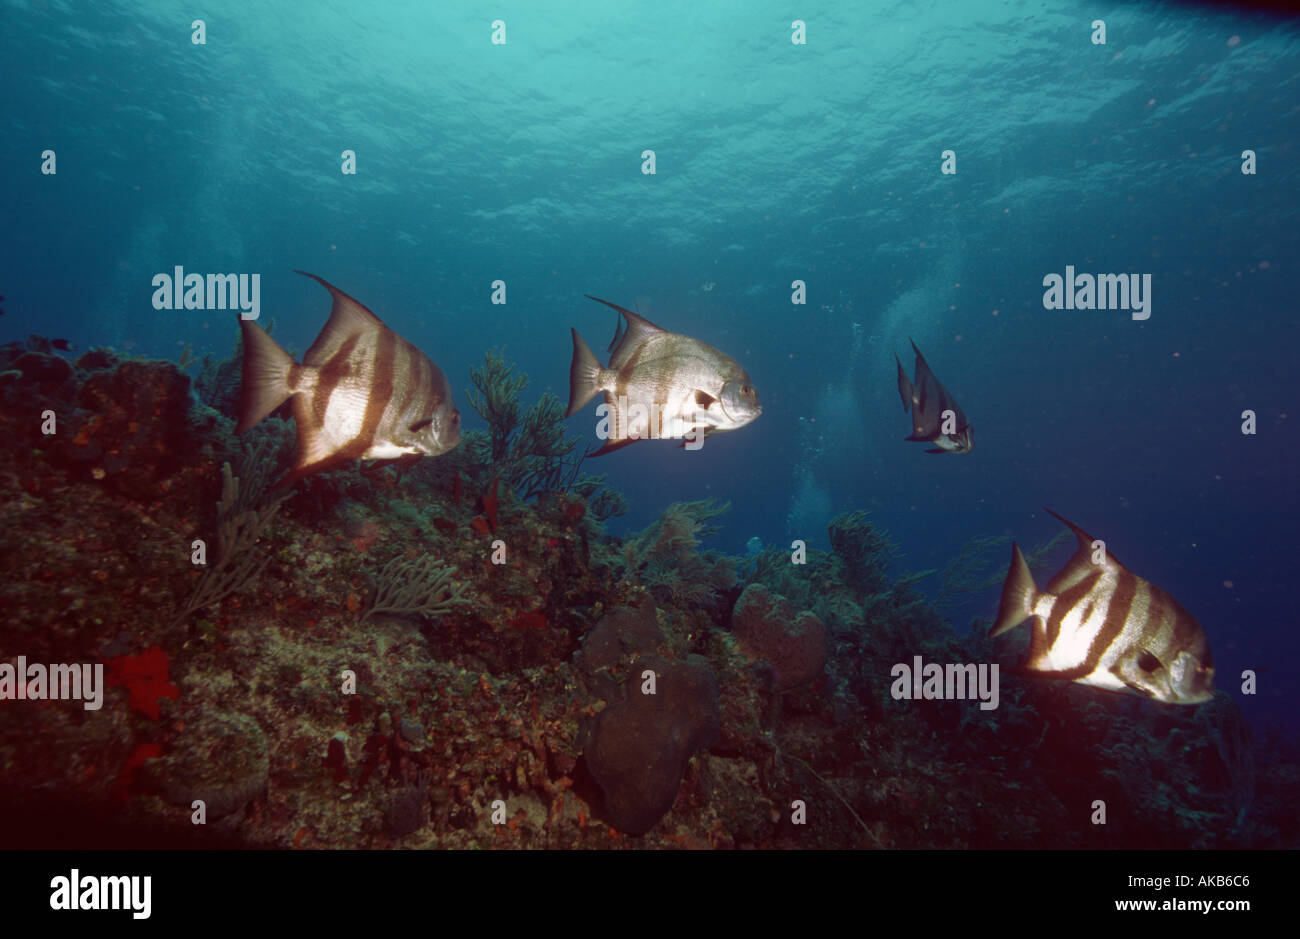 Silvery striped Atlantic spadefish busily swim over coral reef gardens in the Caribbean Stock Photo